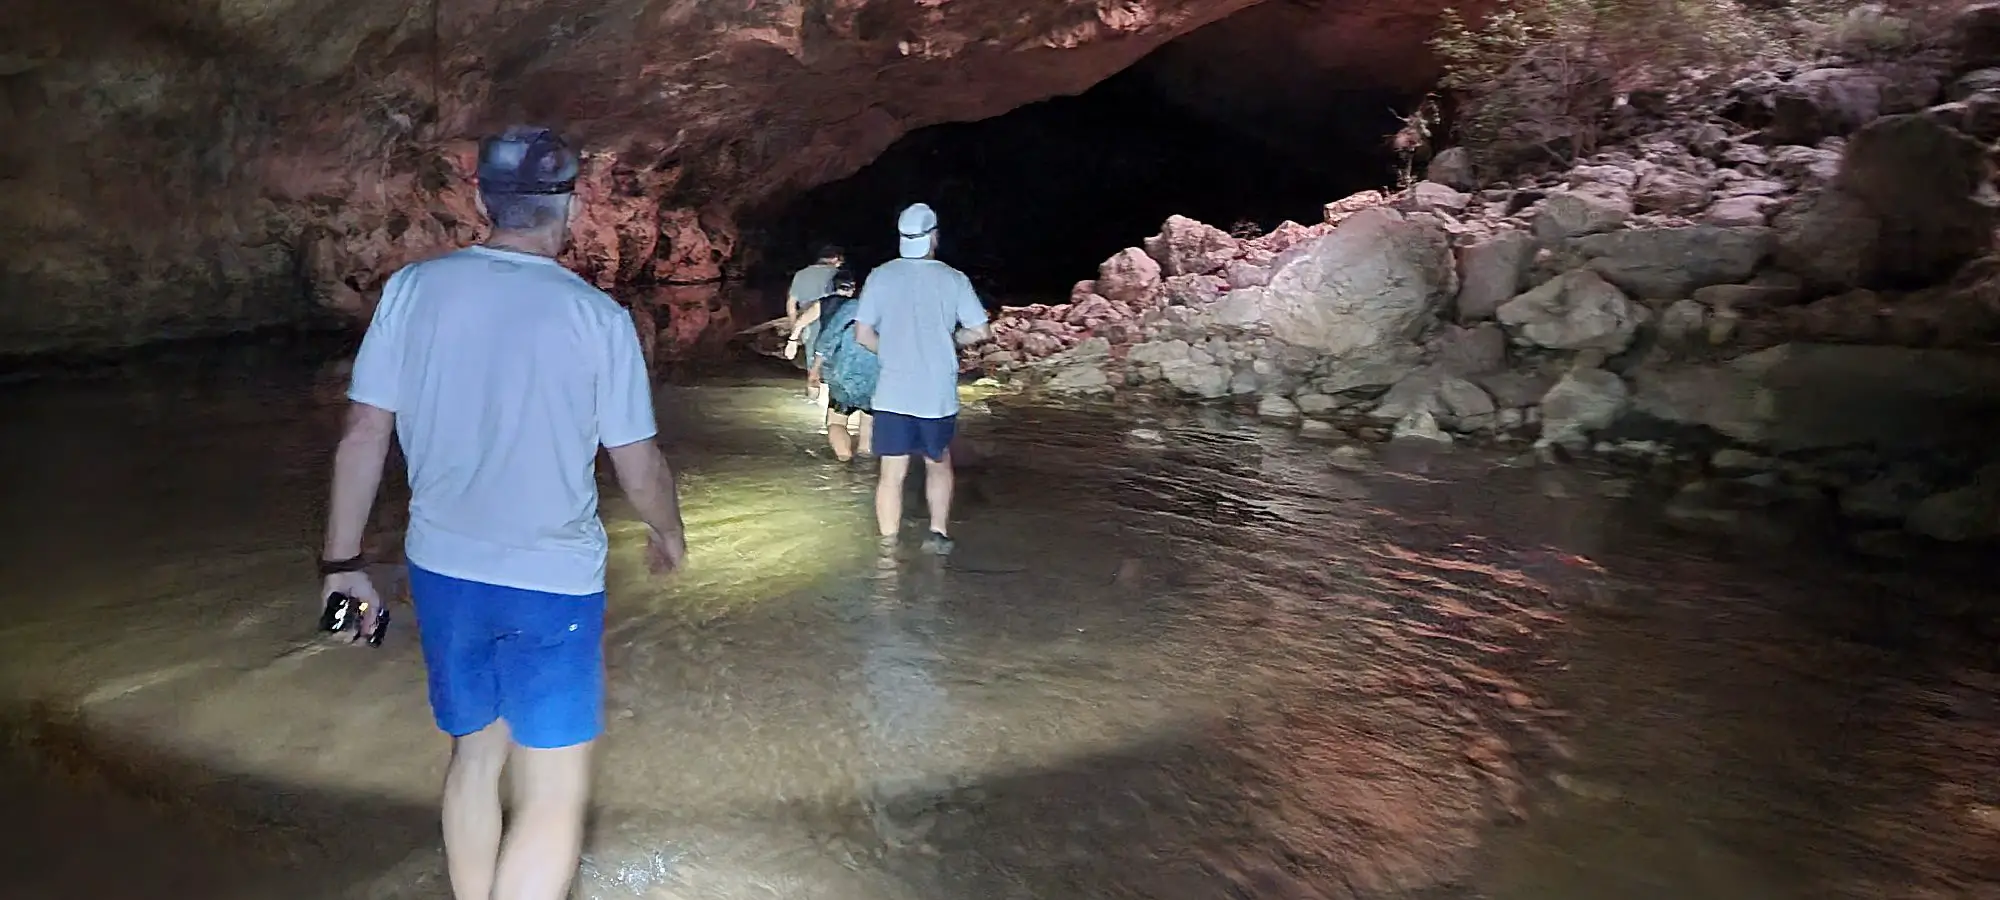 Tunel creek Kimberley's show people wading through water in the darkness with head torches on